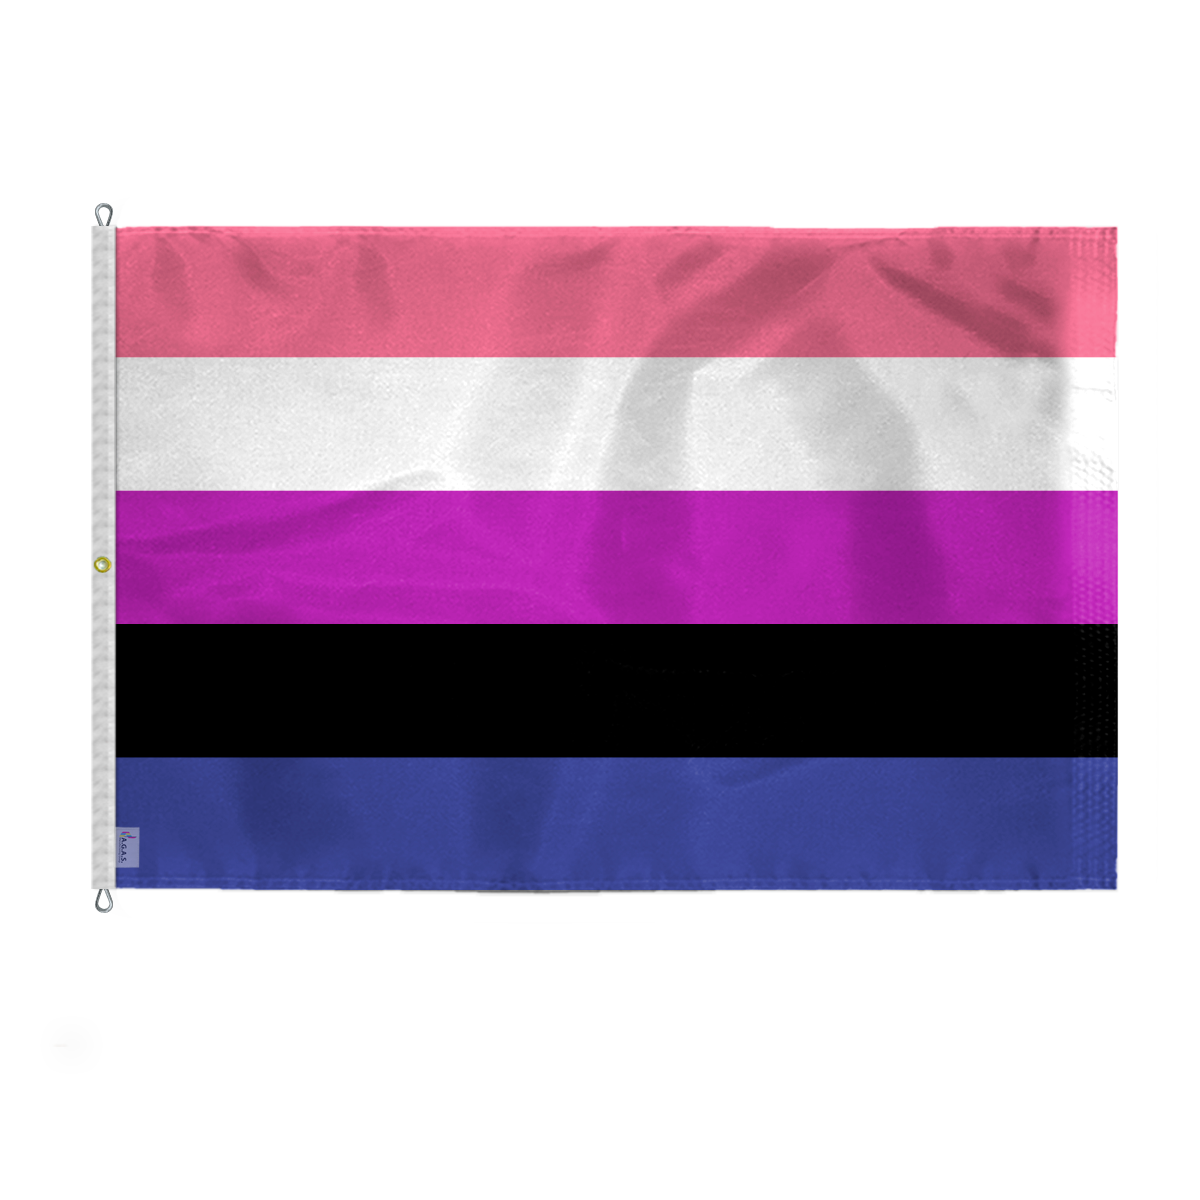 AGAS Large Genderfluid Pride Flag 8x12 Ft - Double Sided Printed 200D Nylon